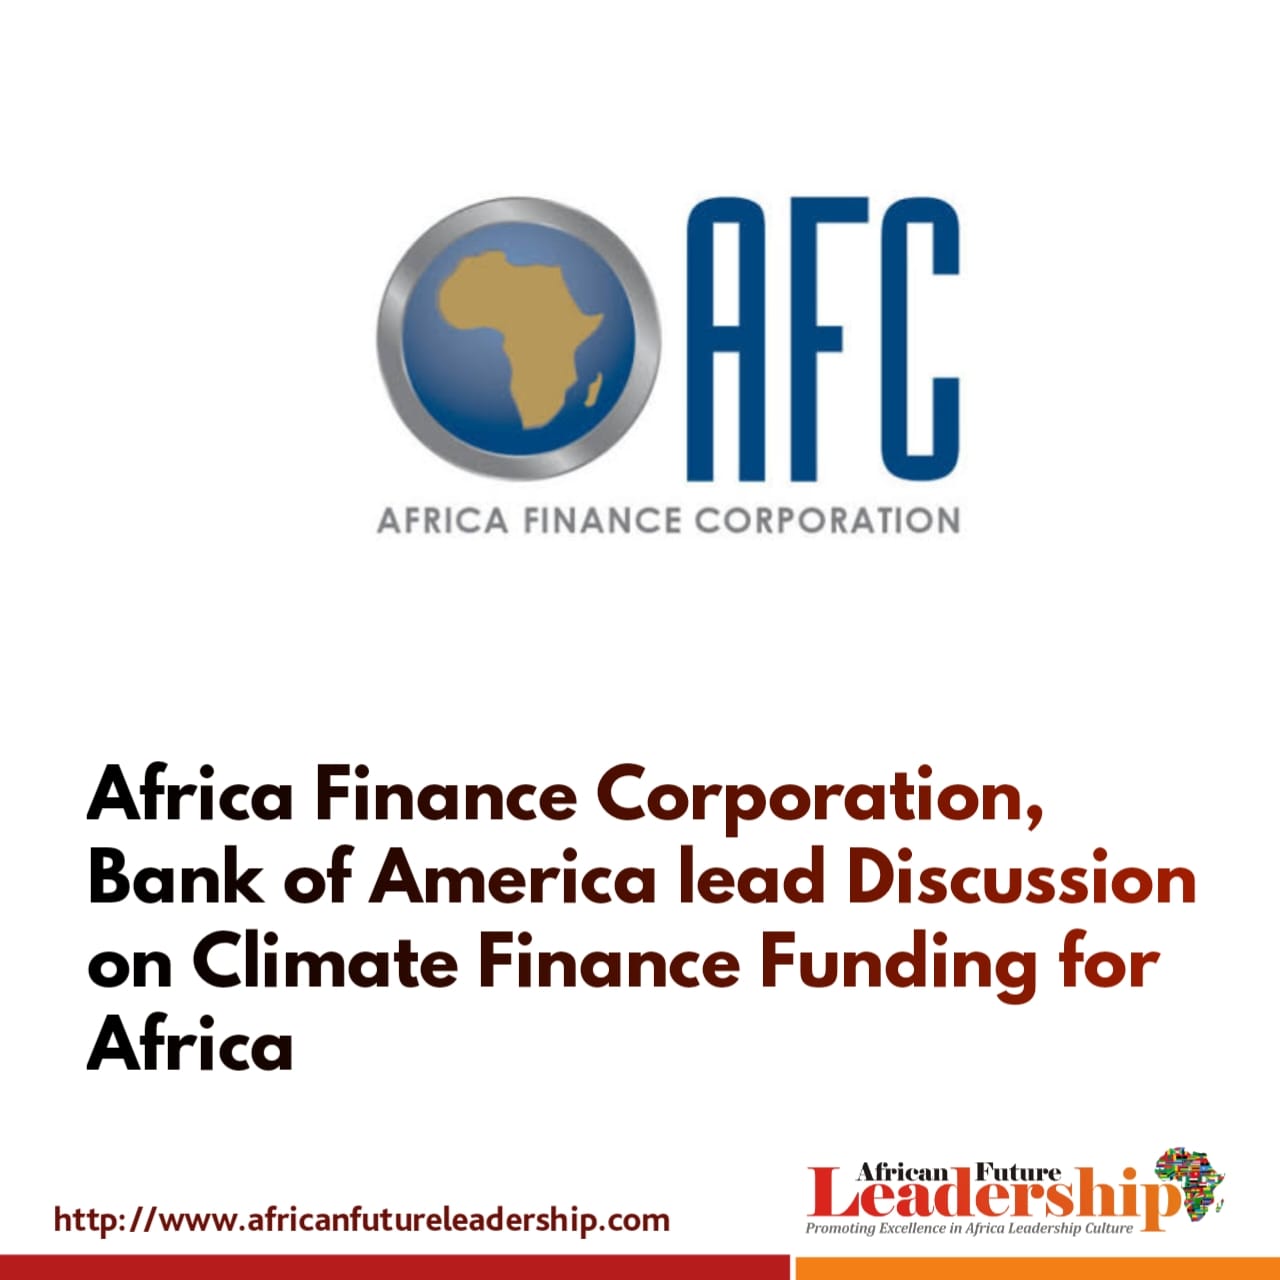 Africa Finance Corporation, Bank of America lead Discussion on Climate Finance Funding for Africa